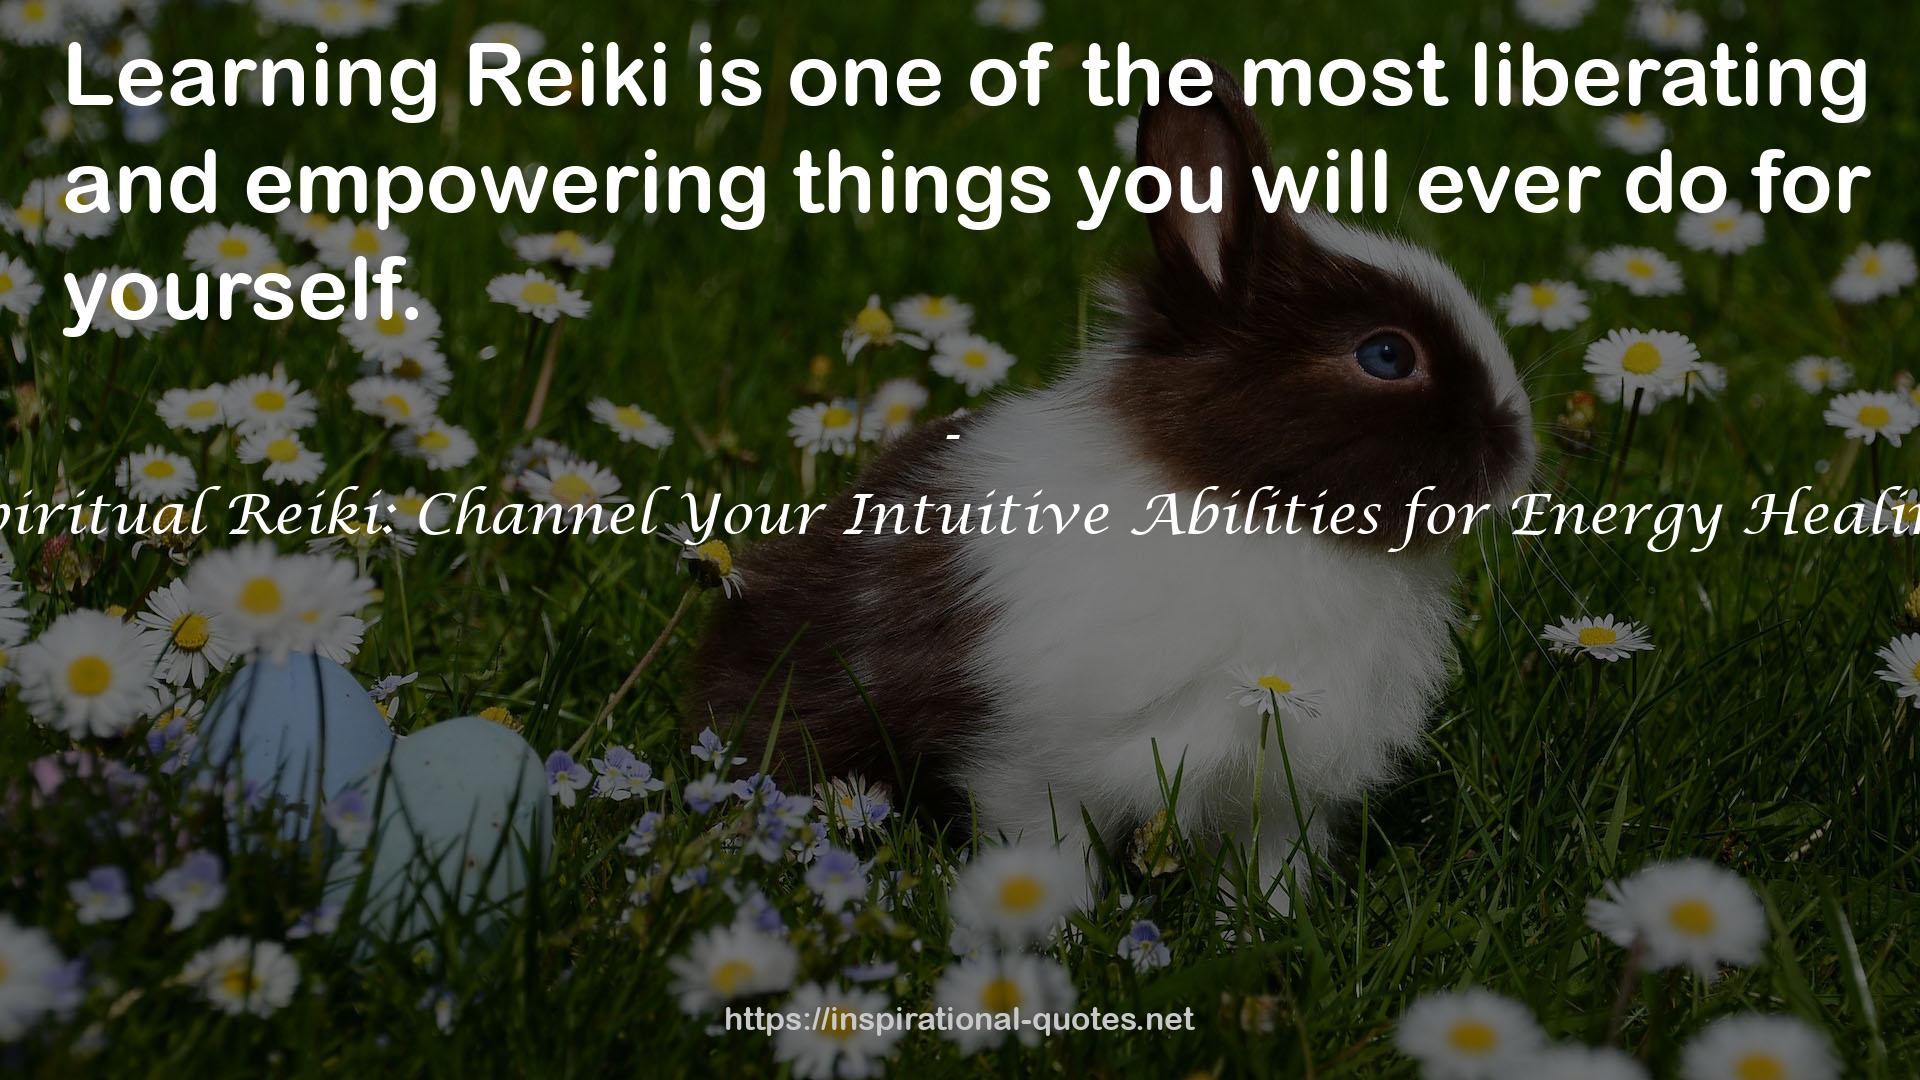 Spiritual Reiki: Channel Your Intuitive Abilities for Energy Healing QUOTES